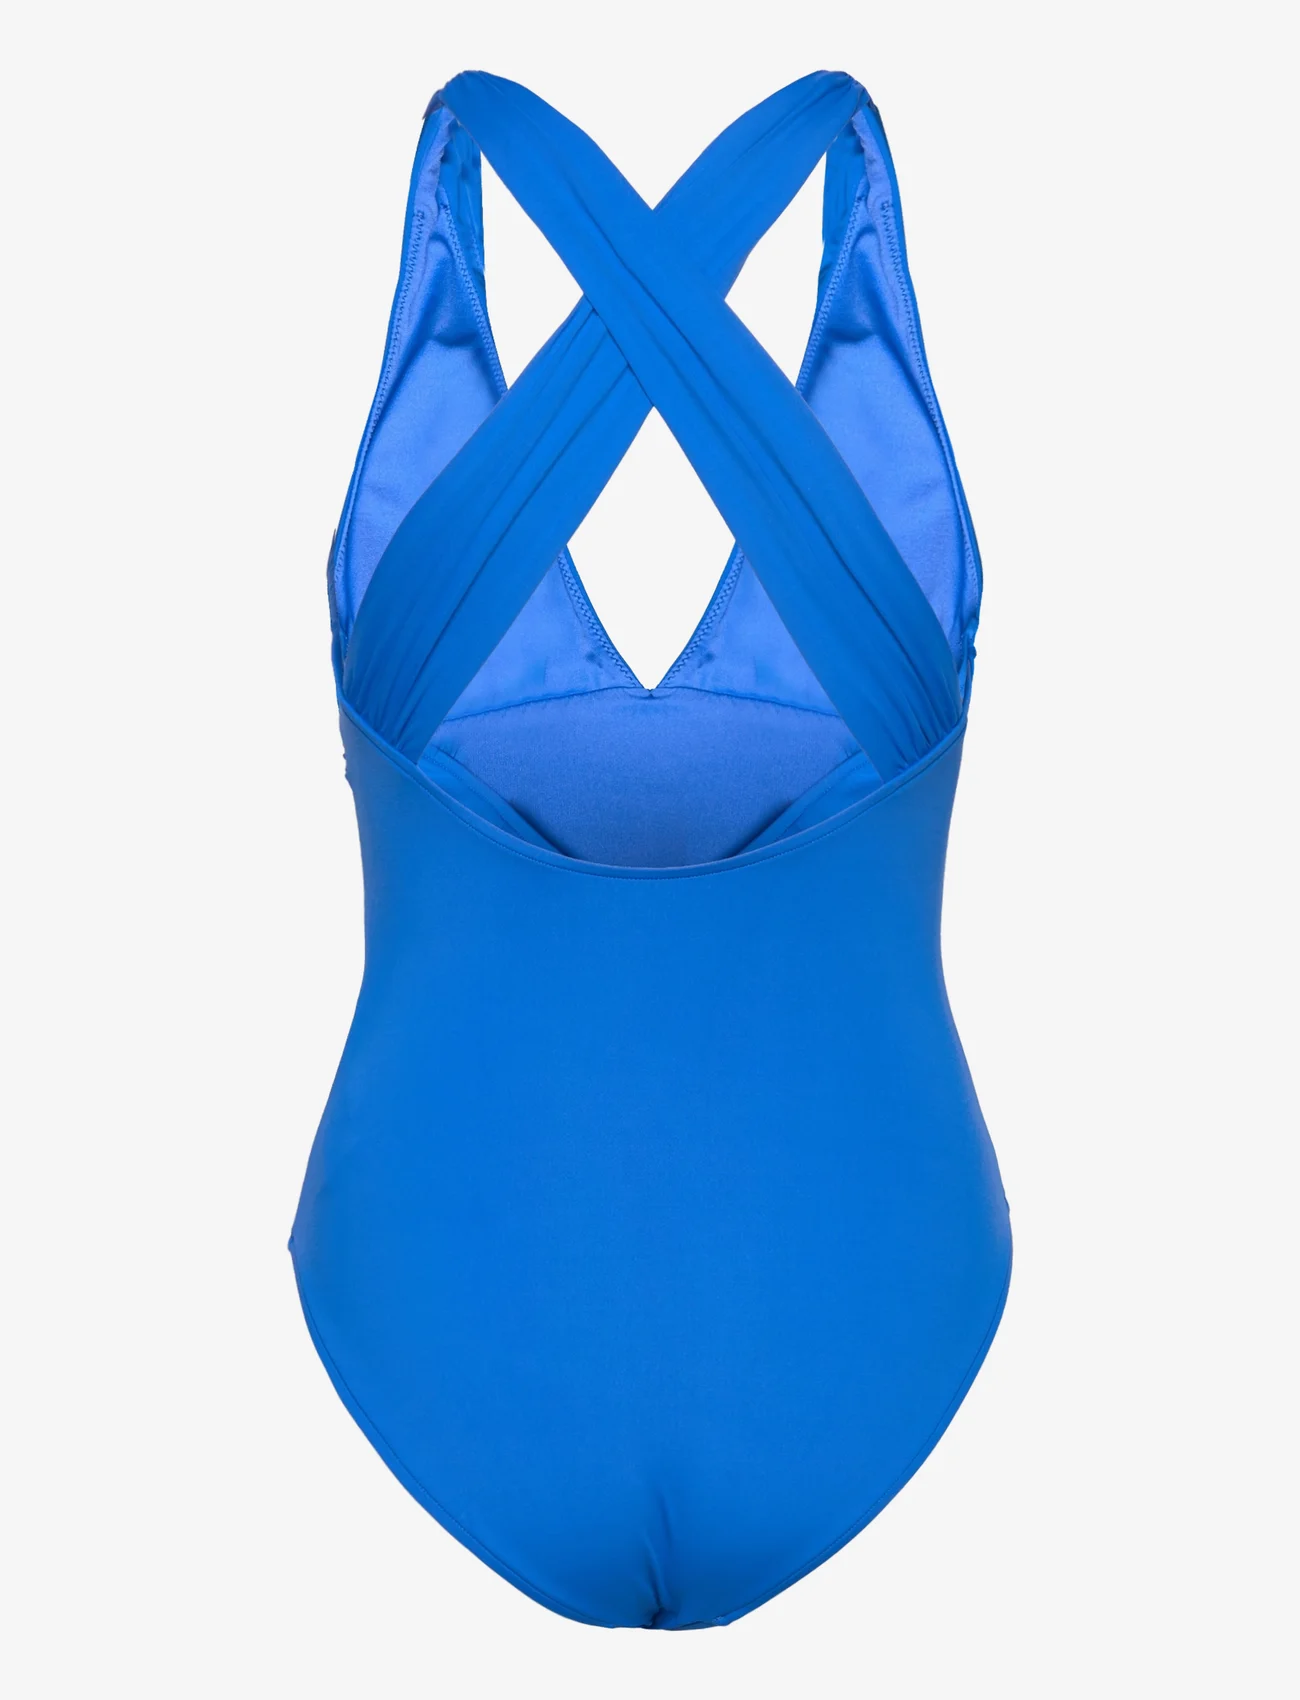 Seafolly - S.Collective Cross Back One Piece - badedrakter - azure - 1